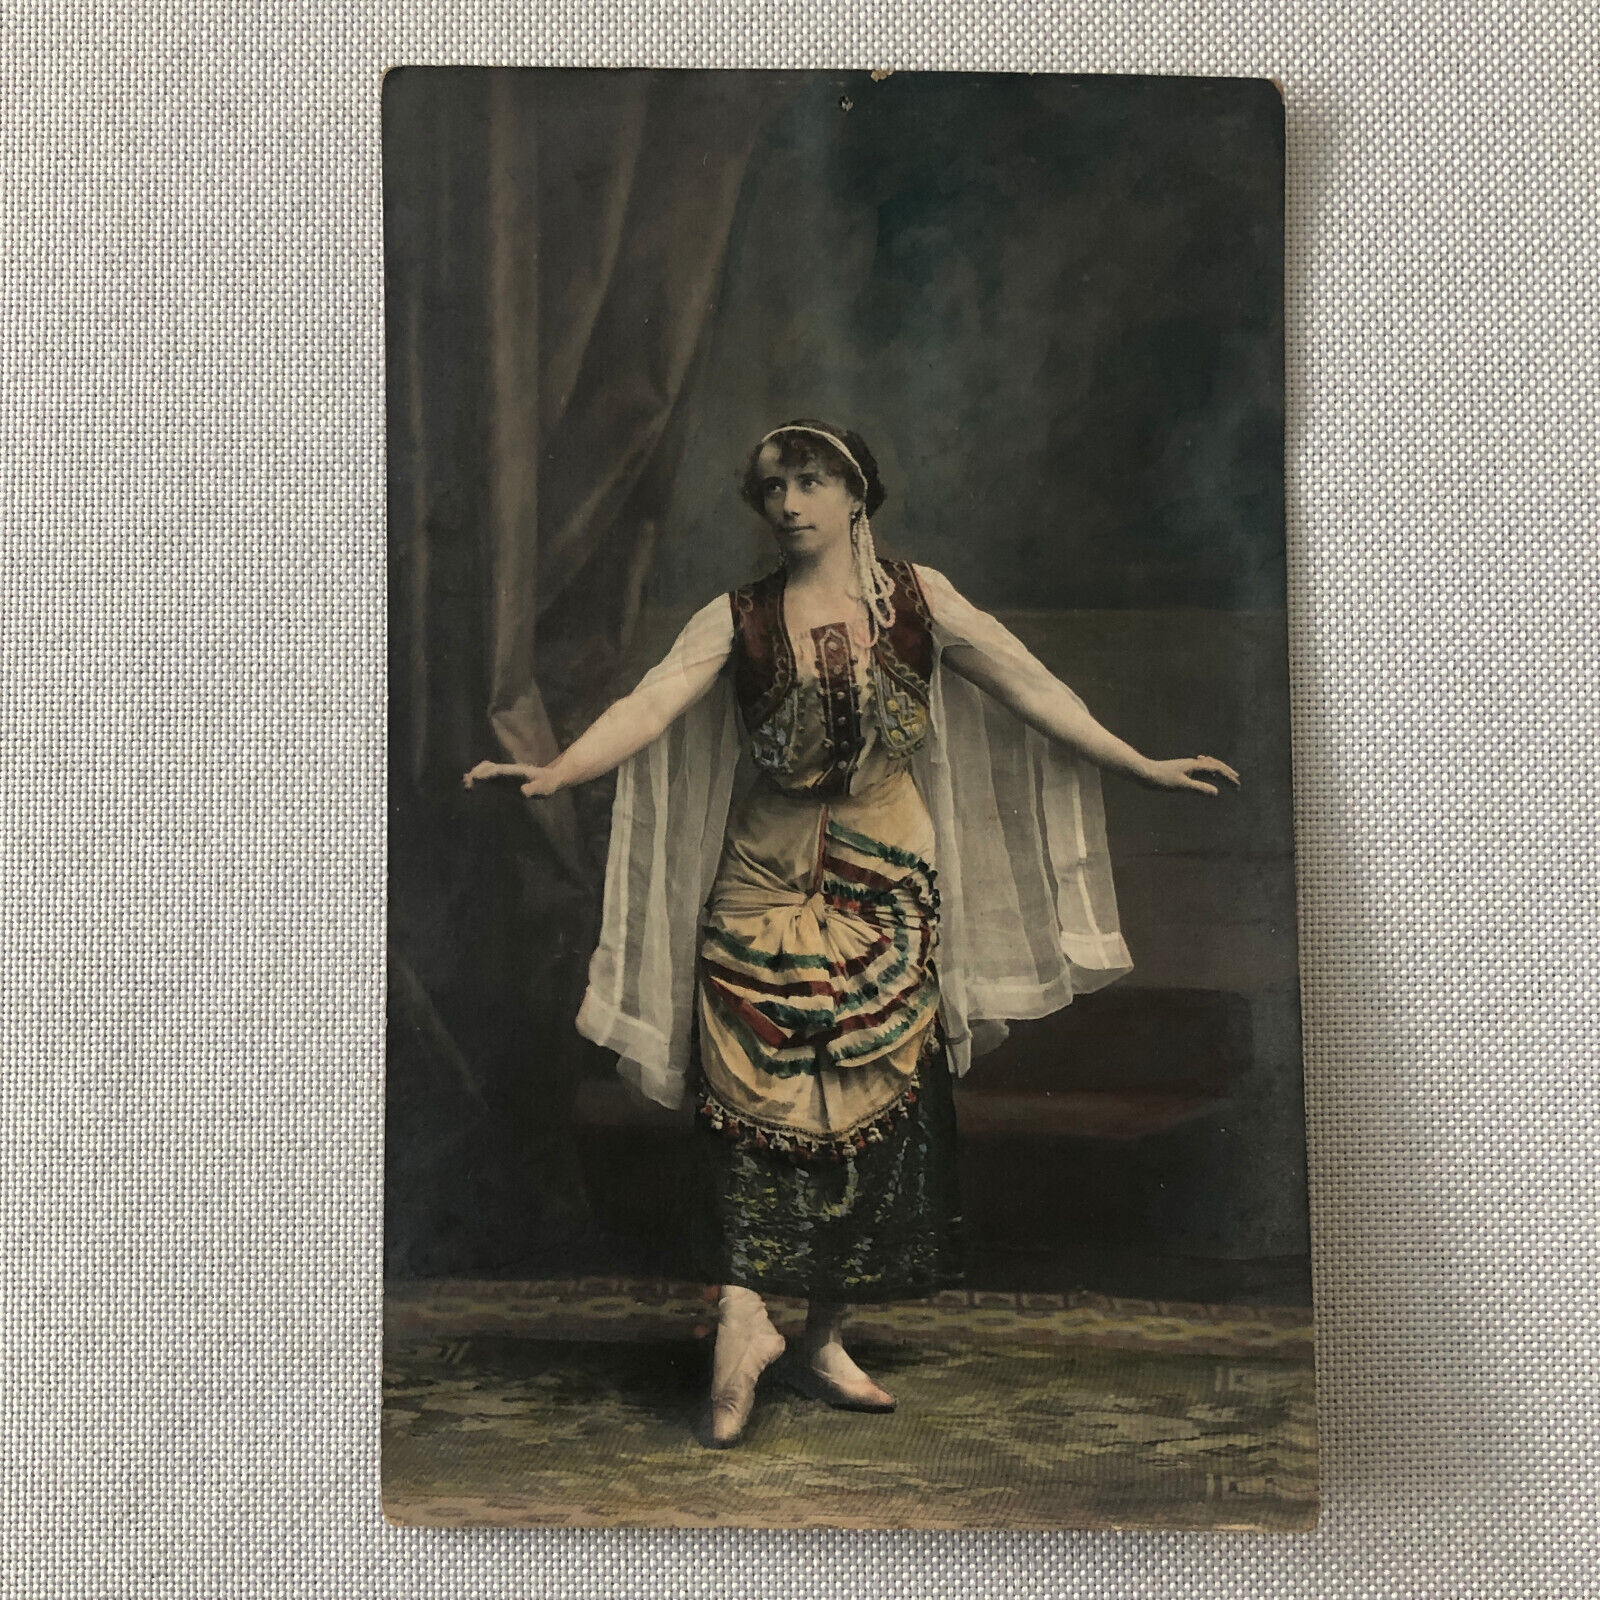 Circus Performer Dancer Antique Real Photo Postcard Post Card RPPC Hand Tinted